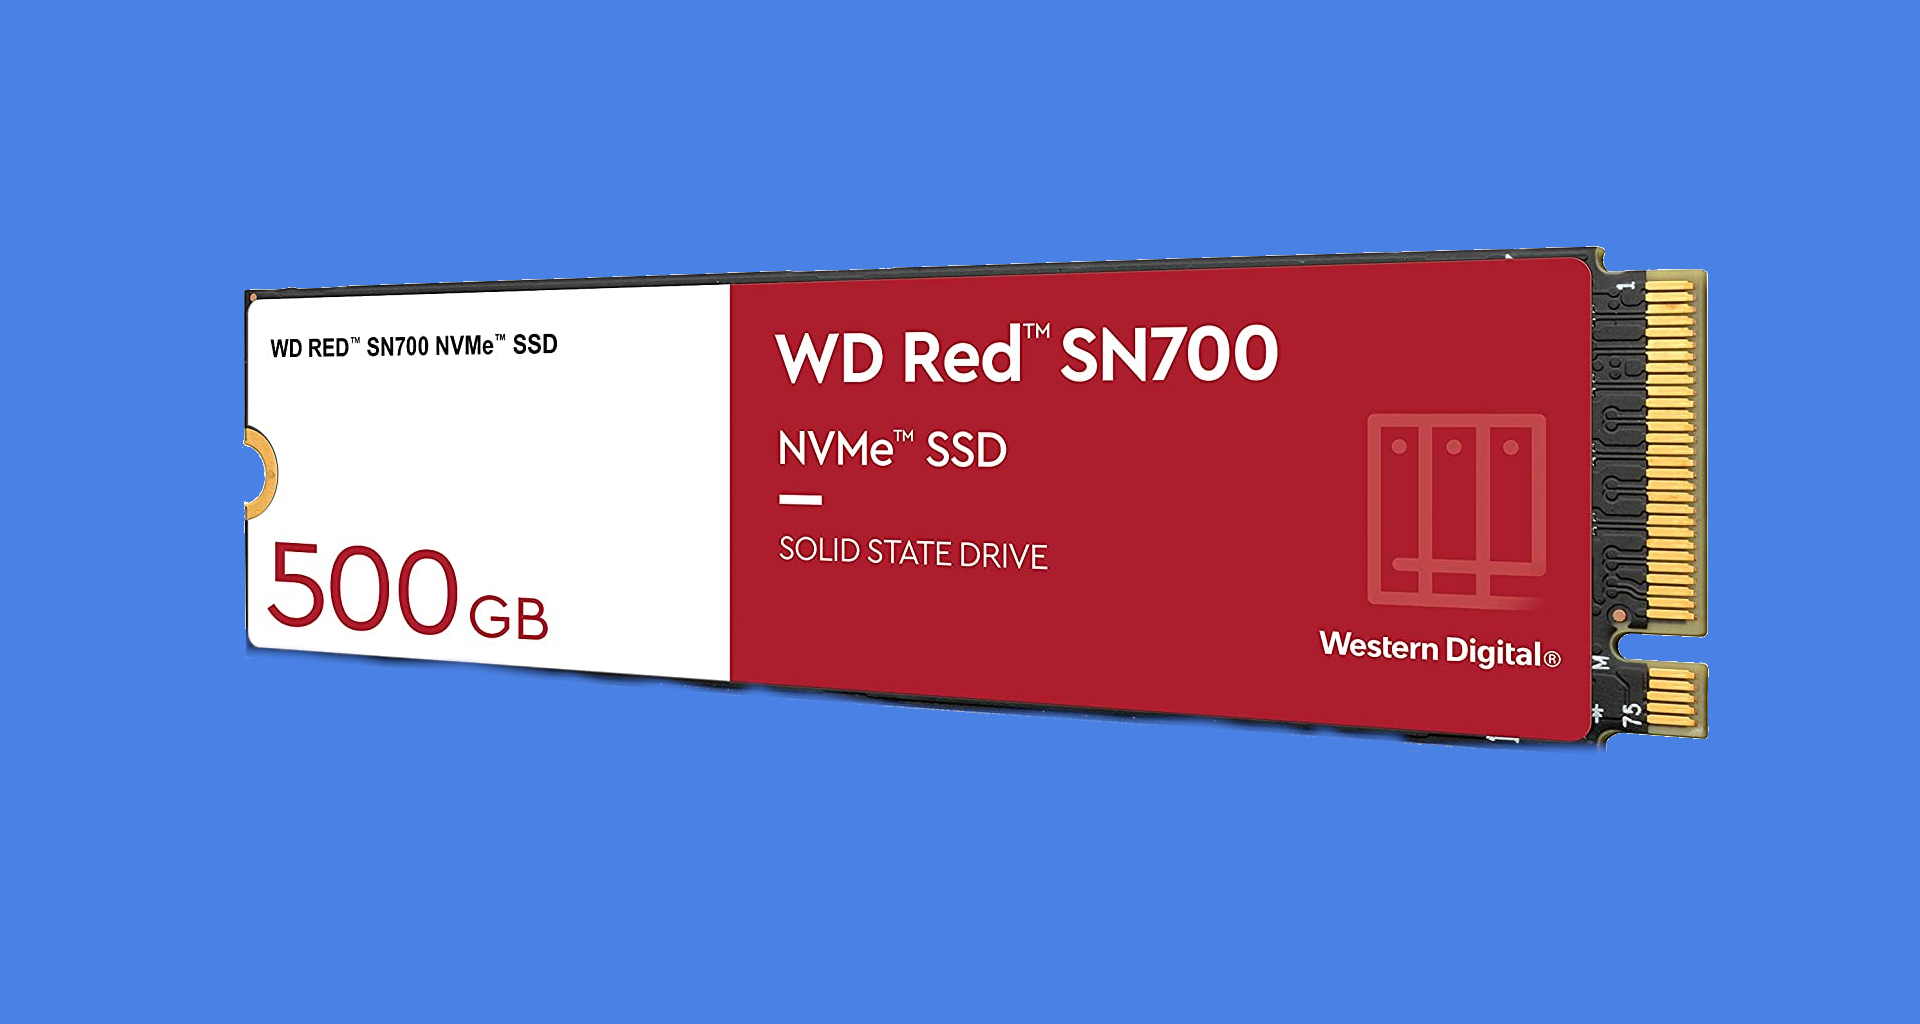 Wd red sn700